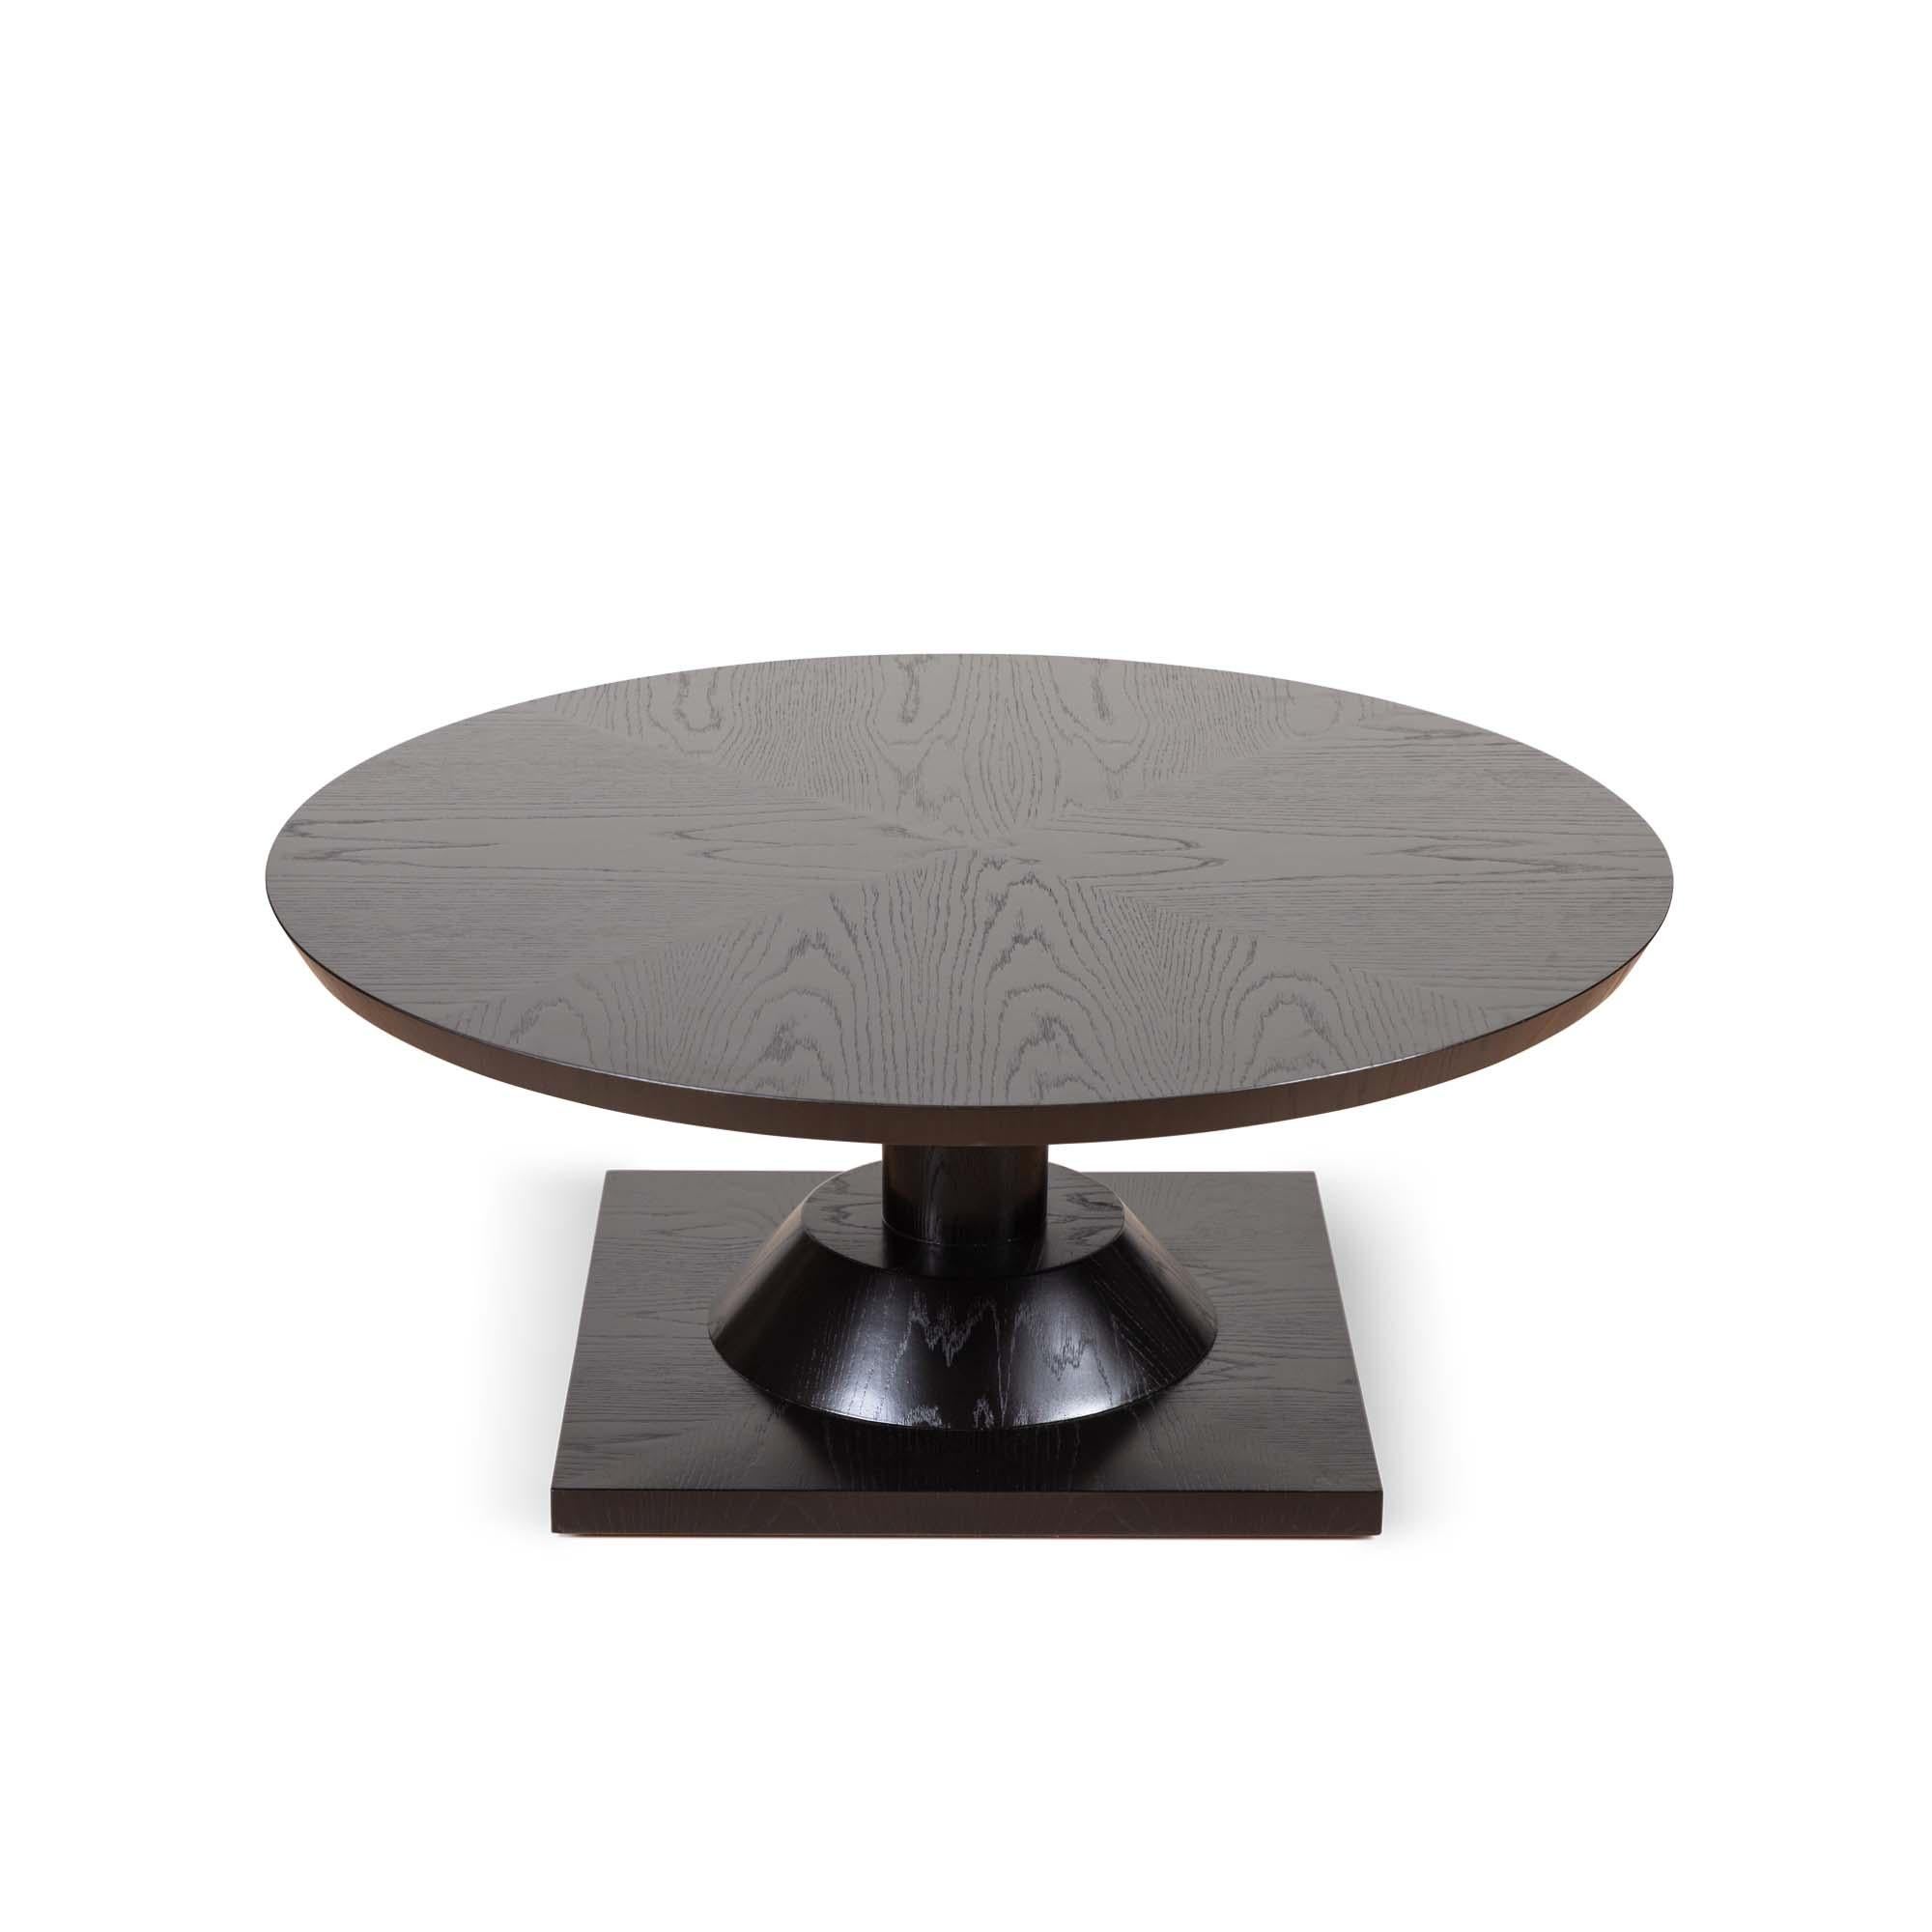 Ebonized oak morro coffee table by Lawson-Fenning. The Morro Coffee Table features a series of geometric shapes stacked on Top of each other with solid wood details. Available in American walnut or white oak.

The Lawson-Fenning Ccollection is